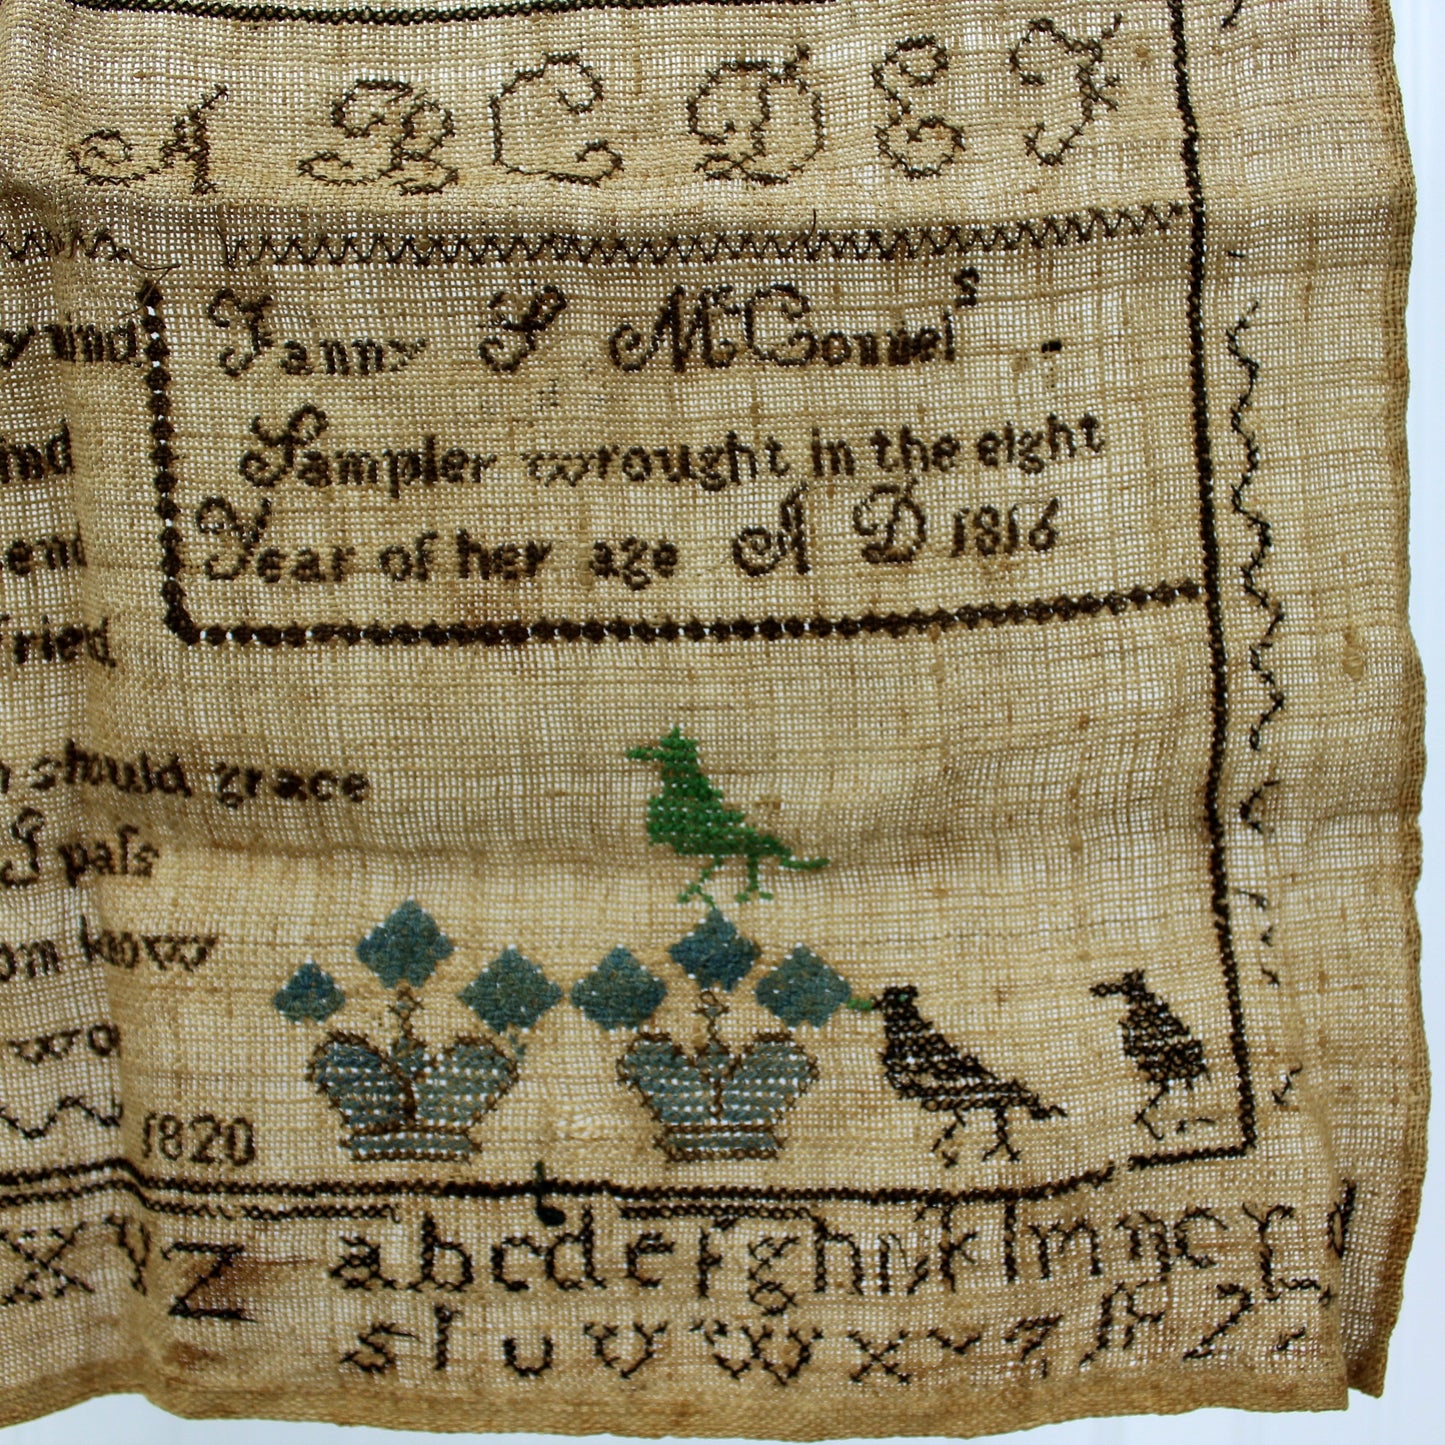 Antique Linen Sampler Fanny L McConnel Age 8 Dates 1816 1820 Crown Birds embroidered various stitches